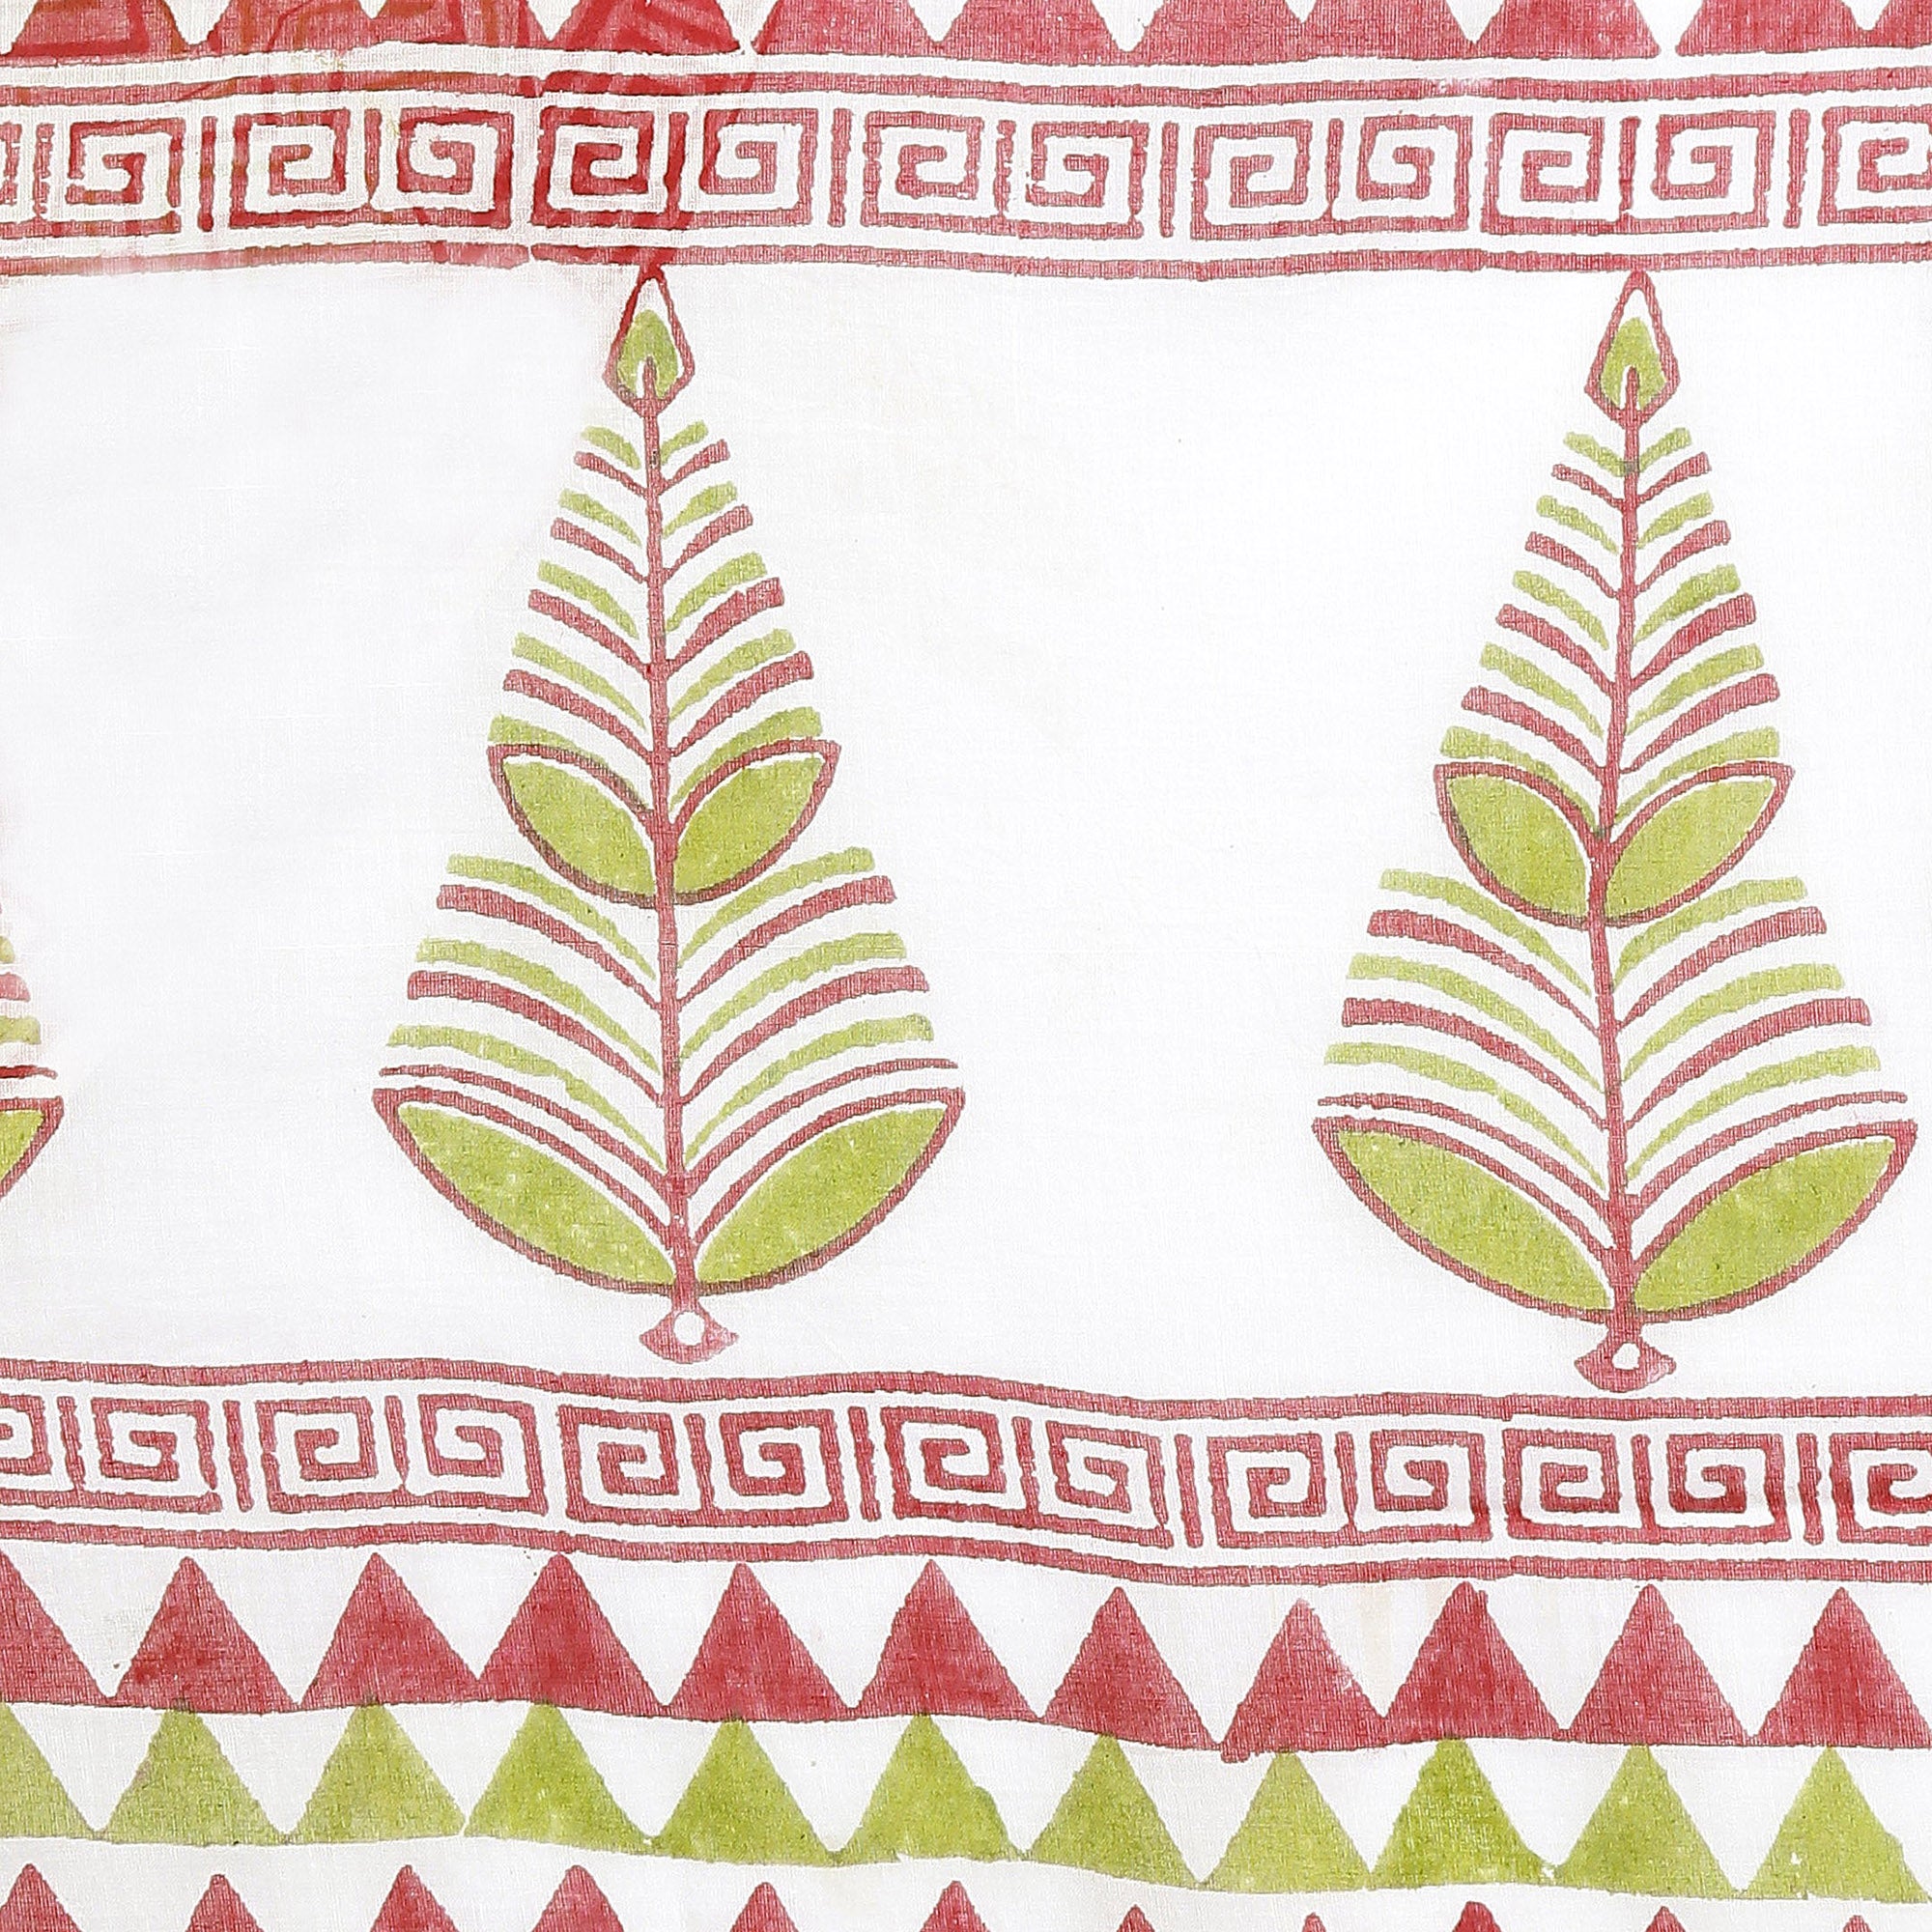 Off-White & Green Hand Block Print Handcrafted Cotton Saree-Saree-Kalakari India-BAPASA0083-Cotton, Dabu, Geographical Indication, Hand Blocks, Hand Crafted, Heritage Prints, Sarees, Sustainable Fabrics-[Linen,Ethnic,wear,Fashionista,Handloom,Handicraft,Indigo,blockprint,block,print,Cotton,Chanderi,Blue, latest,classy,party,bollywood,trendy,summer,style,traditional,formal,elegant,unique,style,hand,block,print, dabu,booti,gift,present,glamorous,affordable,collectible,Sari,Saree,printed, holi, Diw